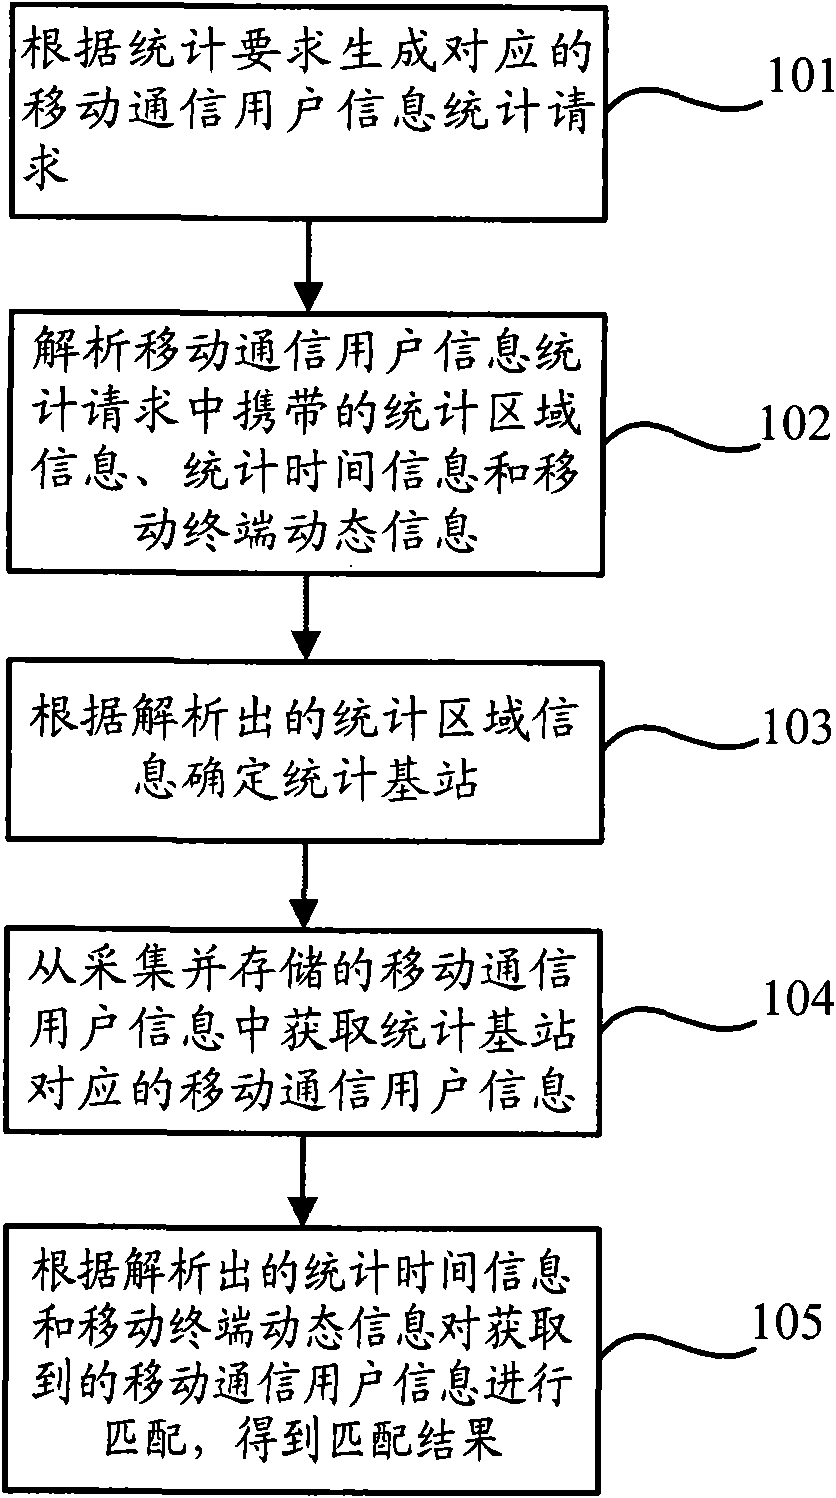 Method and device for mobile communication user information statistics